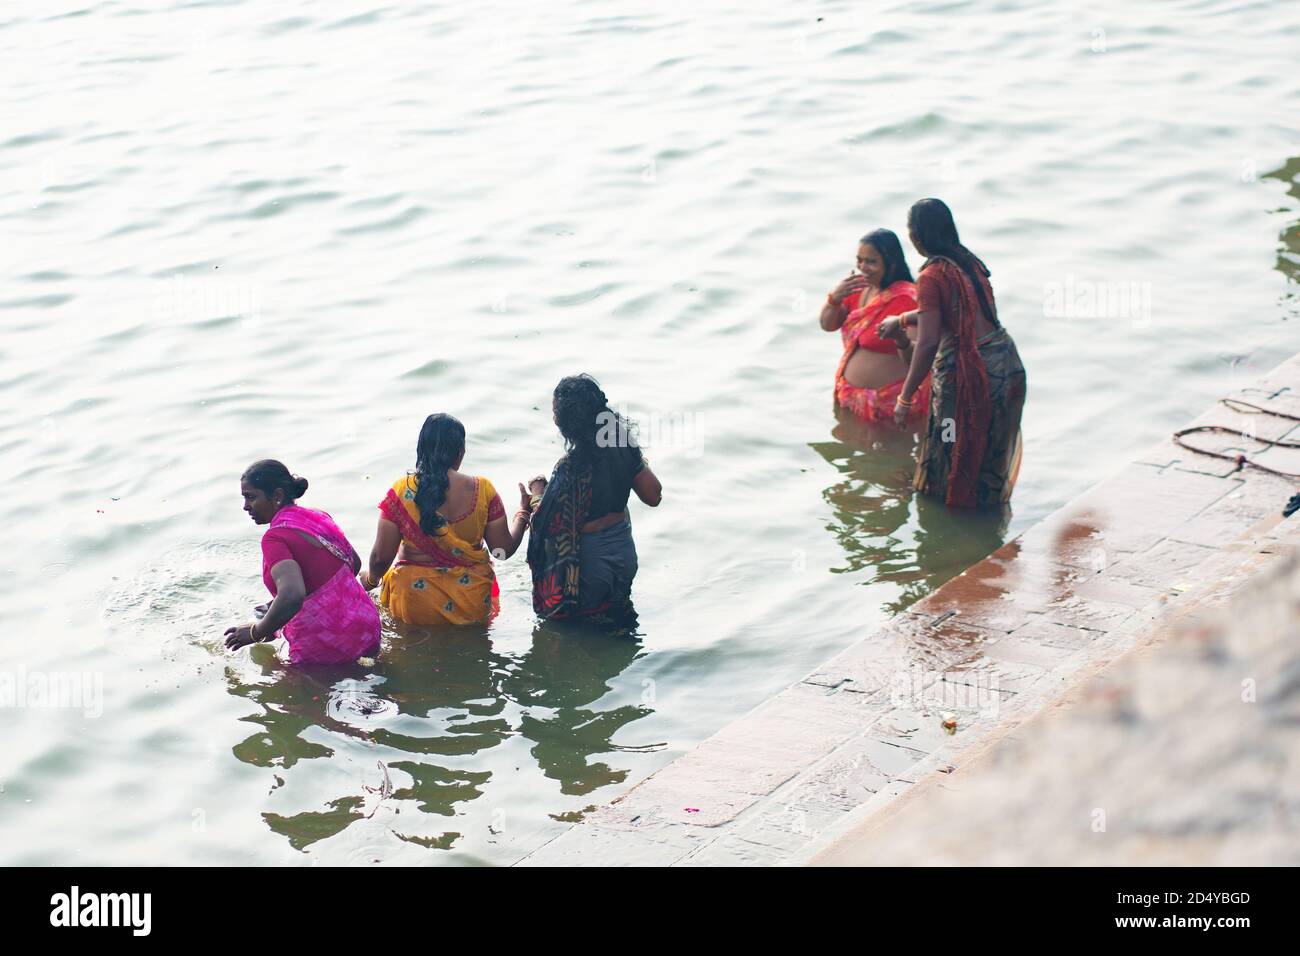 December 17 2019 Varanasi, India. A group of Indian women perform a sacred ablution in the Ganges river. Top view from the back. Stock Photo